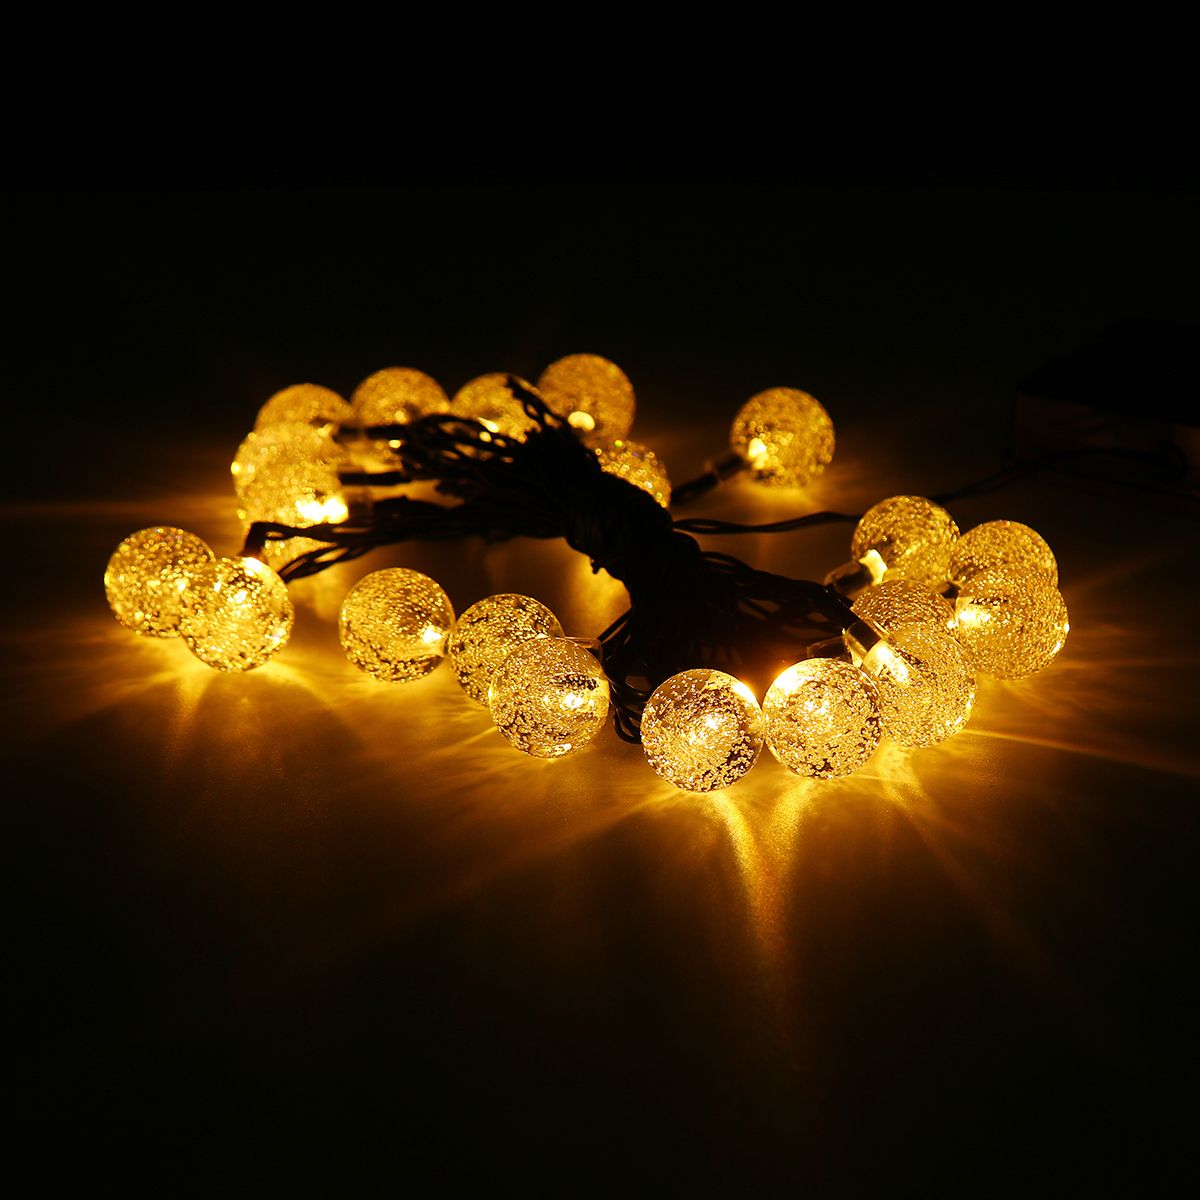 5M-Solar-Powered-20LED-String-Light-Two-Modes-Garden-Path-Yard-Decor-Lamp-Outdoor-Waterproof-1721941